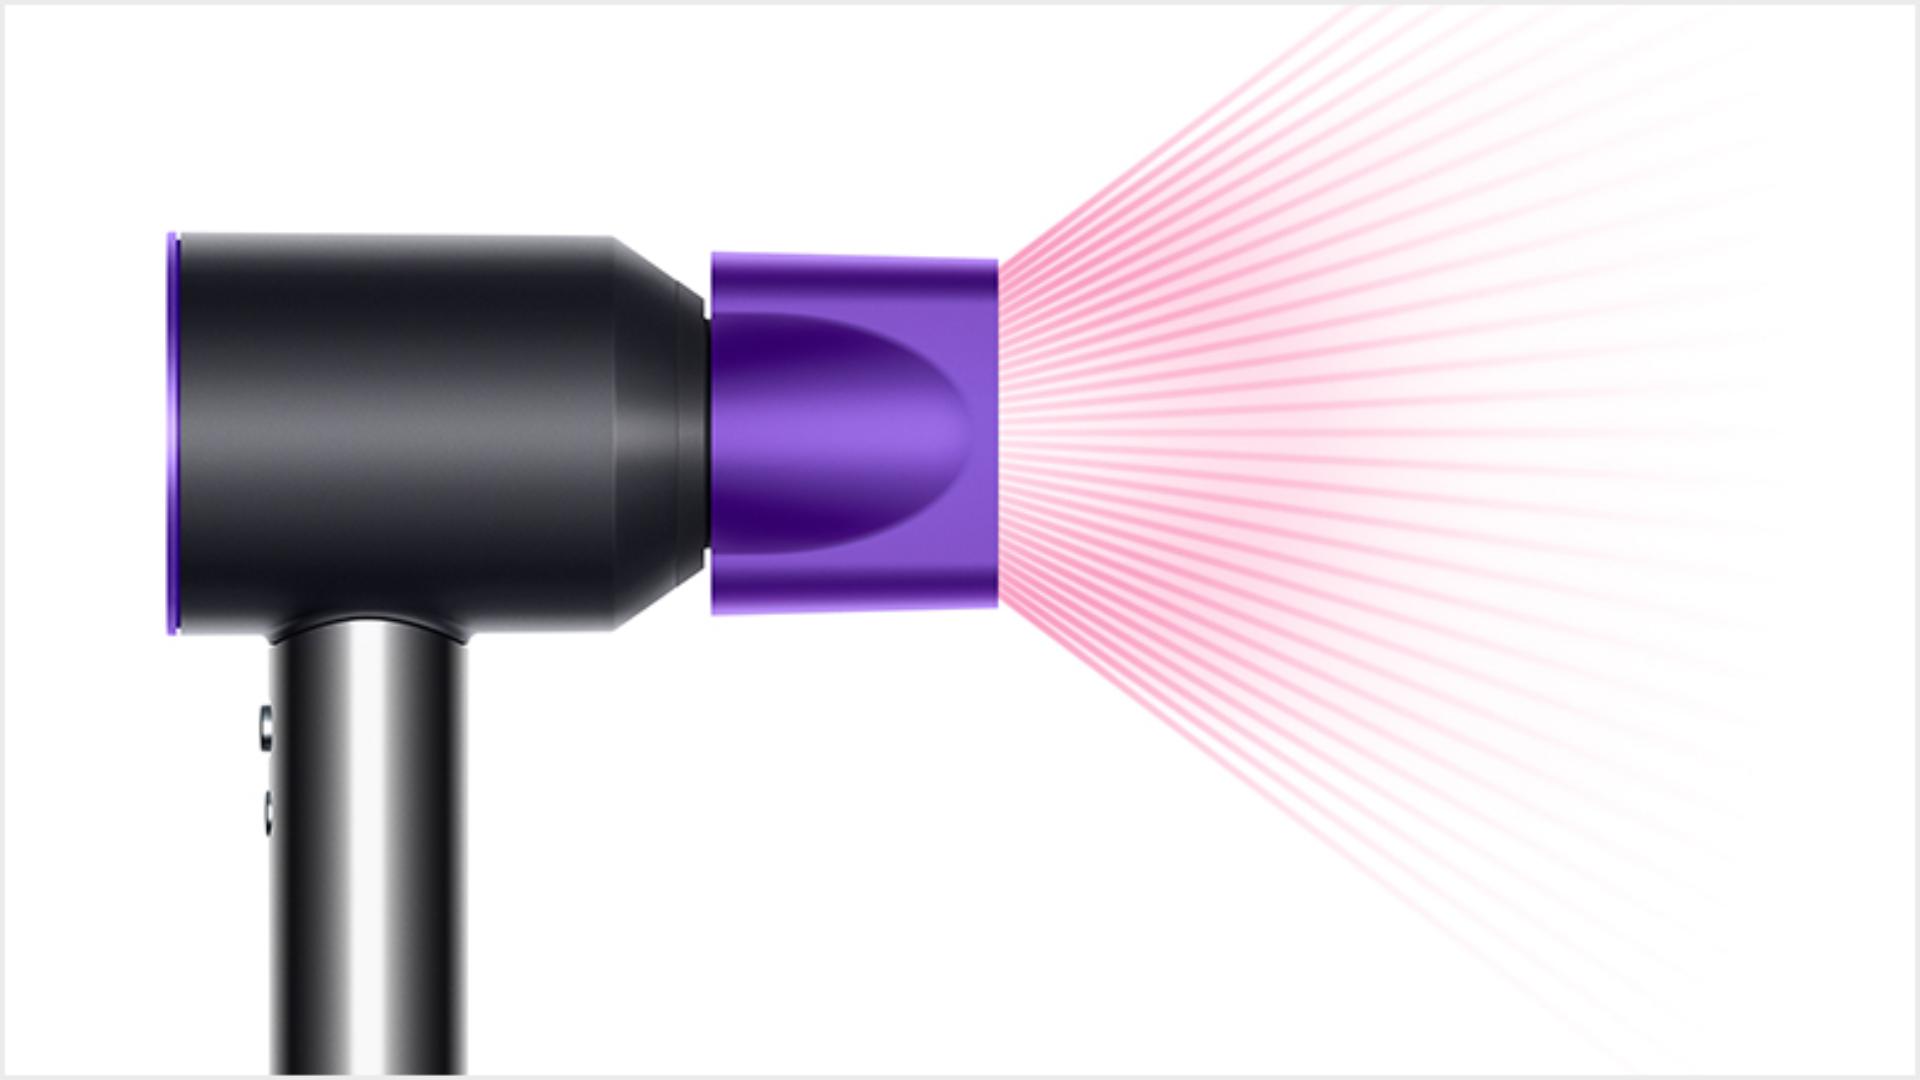 Dyson Supersonic™ hair dryer Black/Nickel with Smoothing nozzle attached